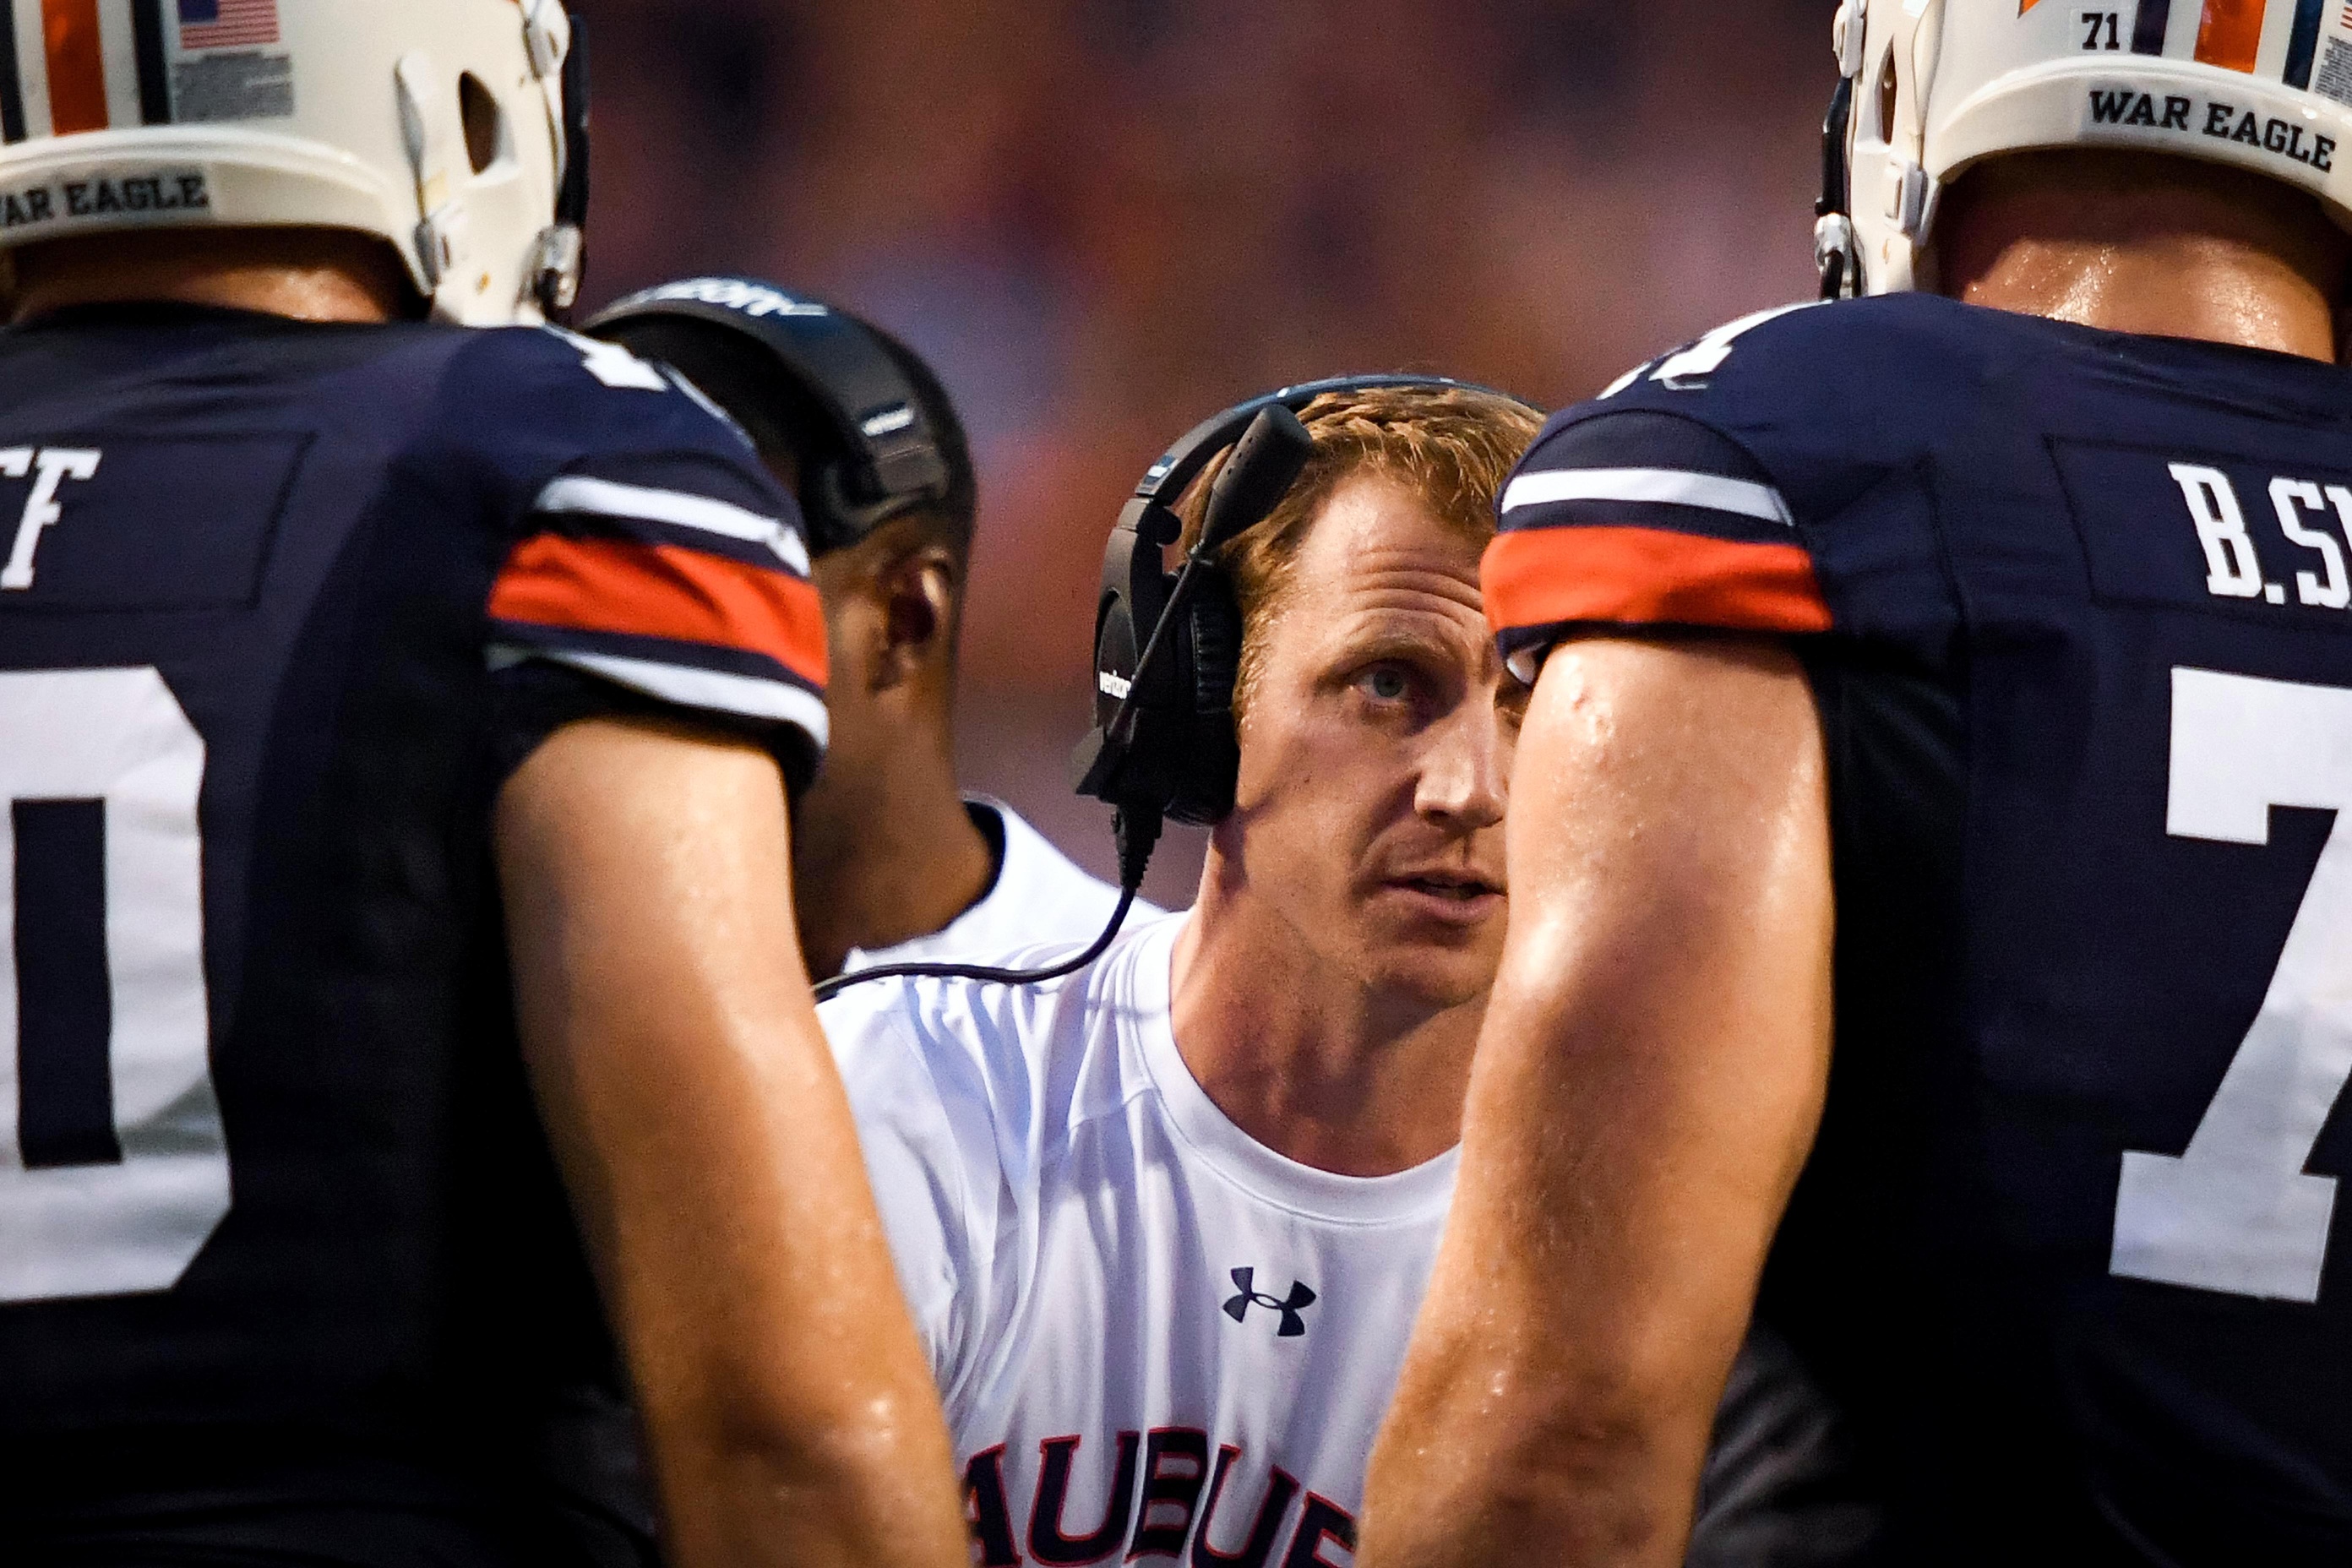 Sep 17, 2016; Auburn, AL, USA; Auburn Tigers offensive coordinator Rhett Lashlee speaks to players during a timeout in the first quarter against the Texas A&M Aggies at Jordan Hare Stadium. Mandatory Credit: Shanna Lockwood-USA TODAY Sports